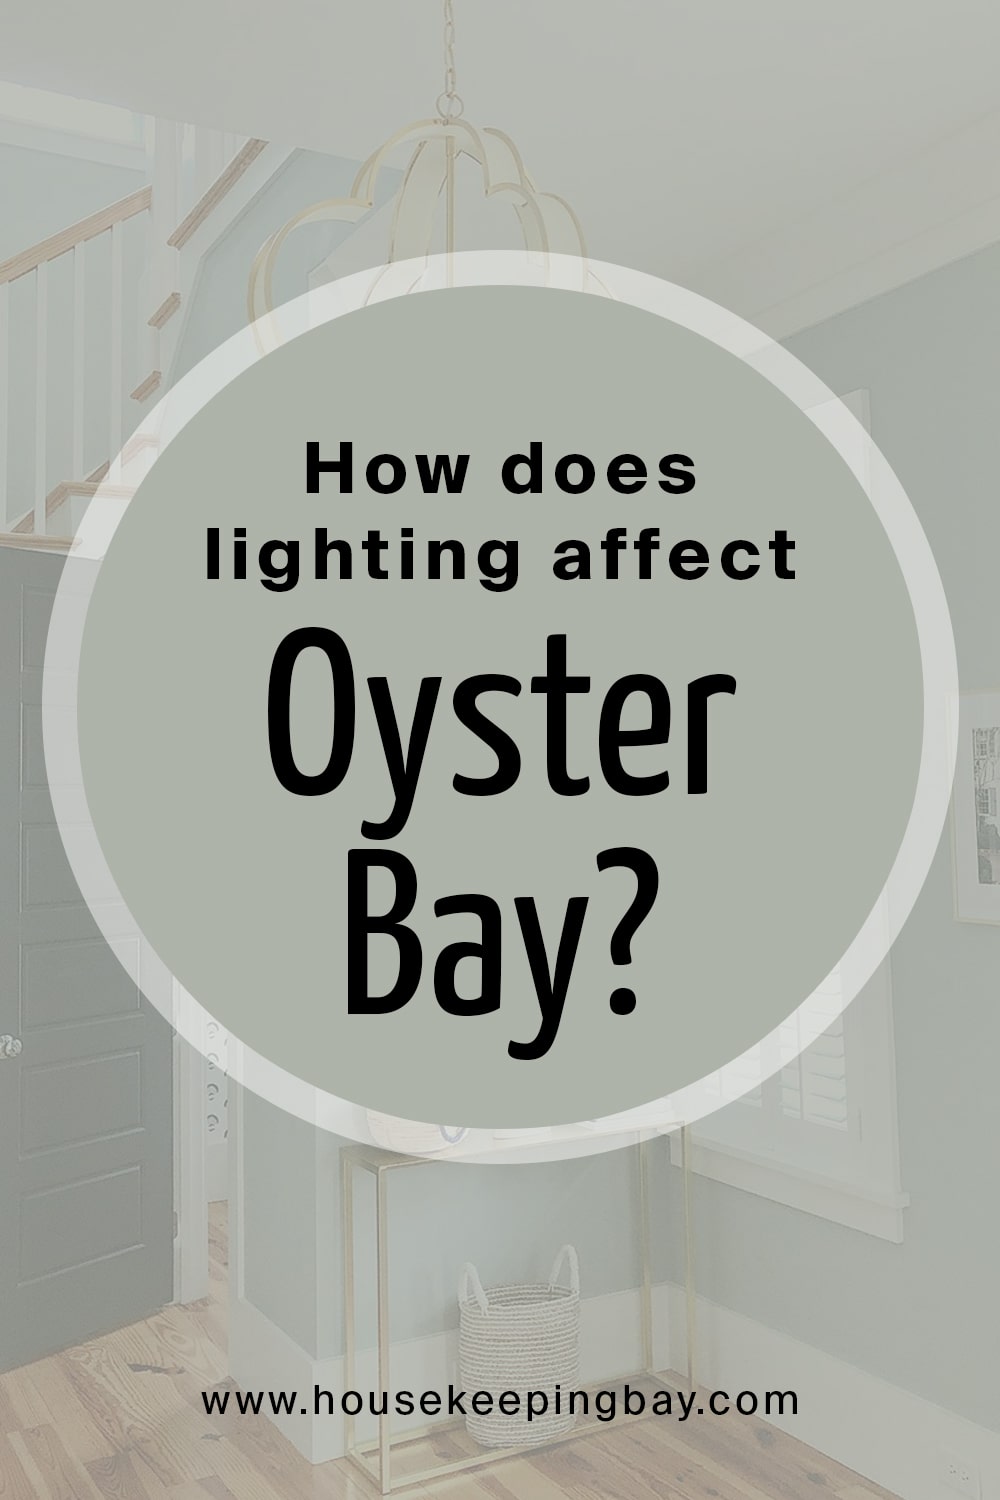 How does lighting affect Oyster Bay